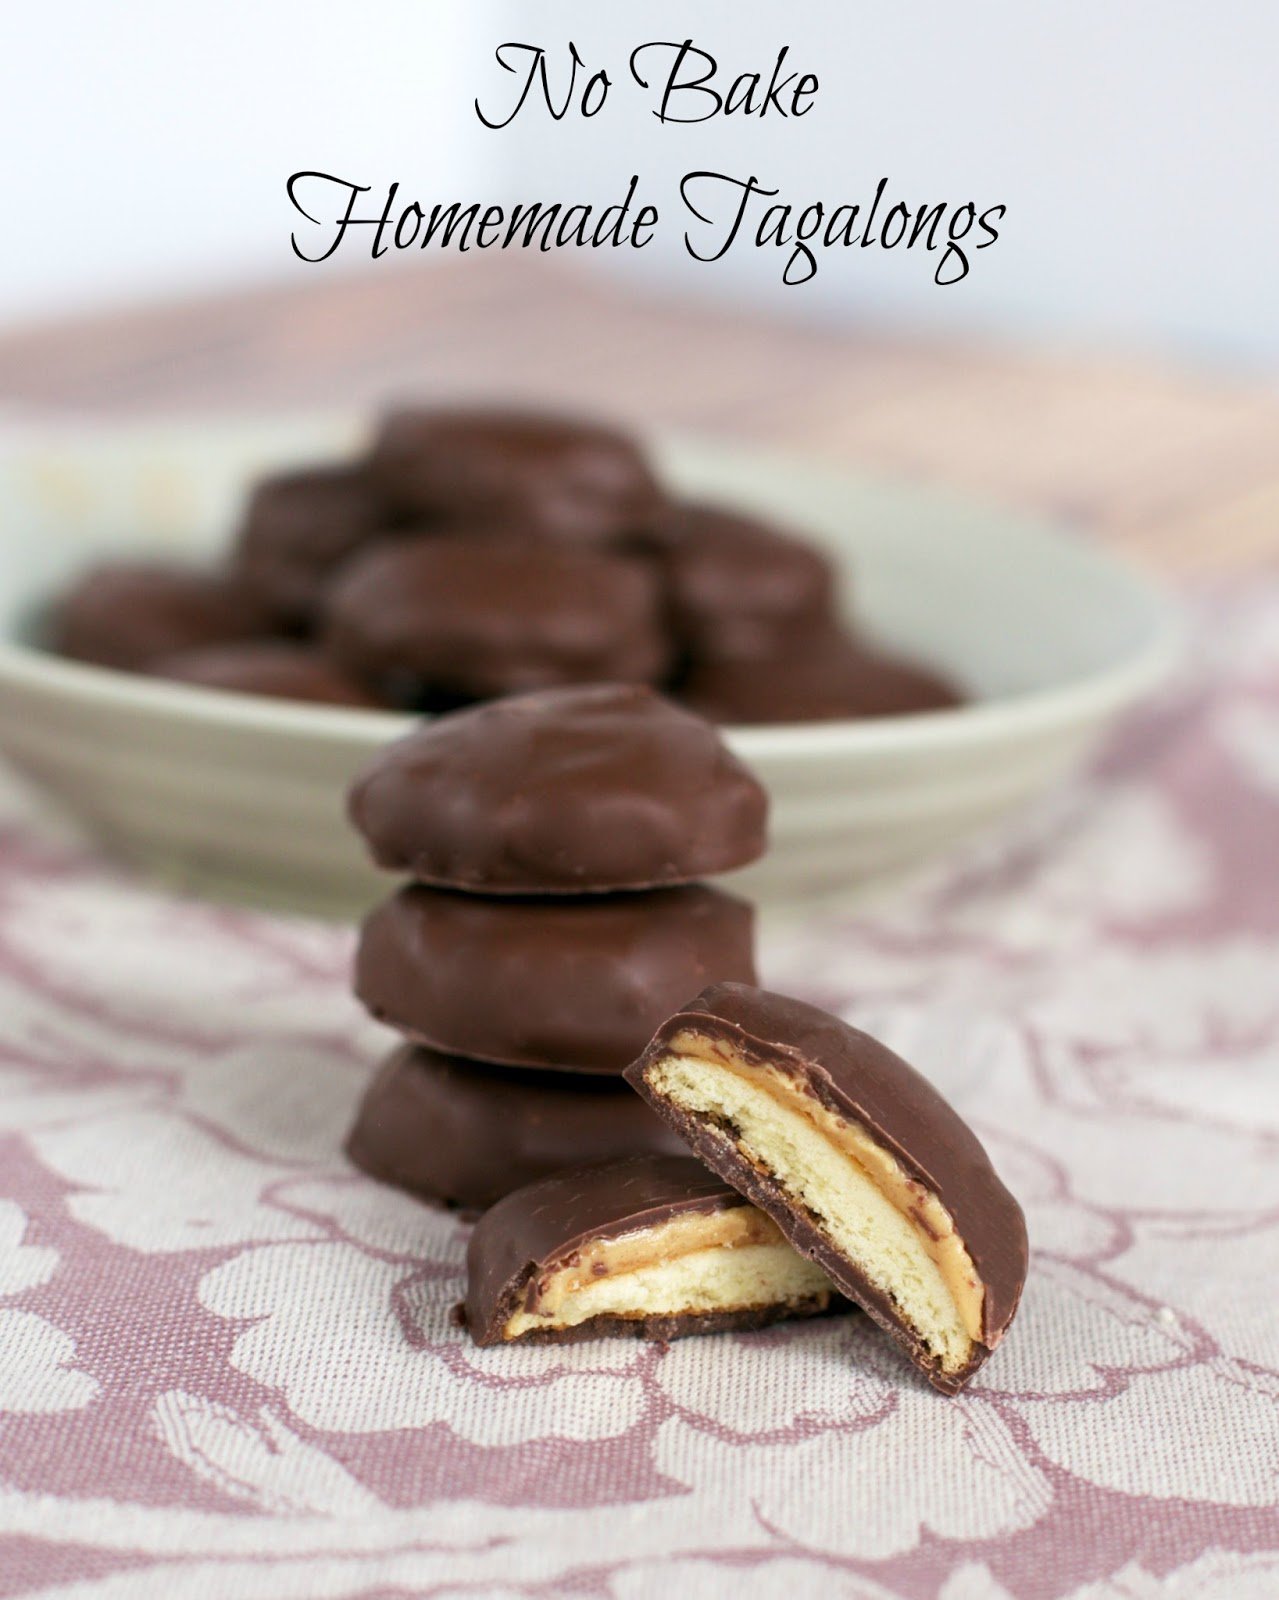 No Bake Homemade Tagalongs {Peanut Butter Patties} - tastes just like the real thing without turning on the oven!